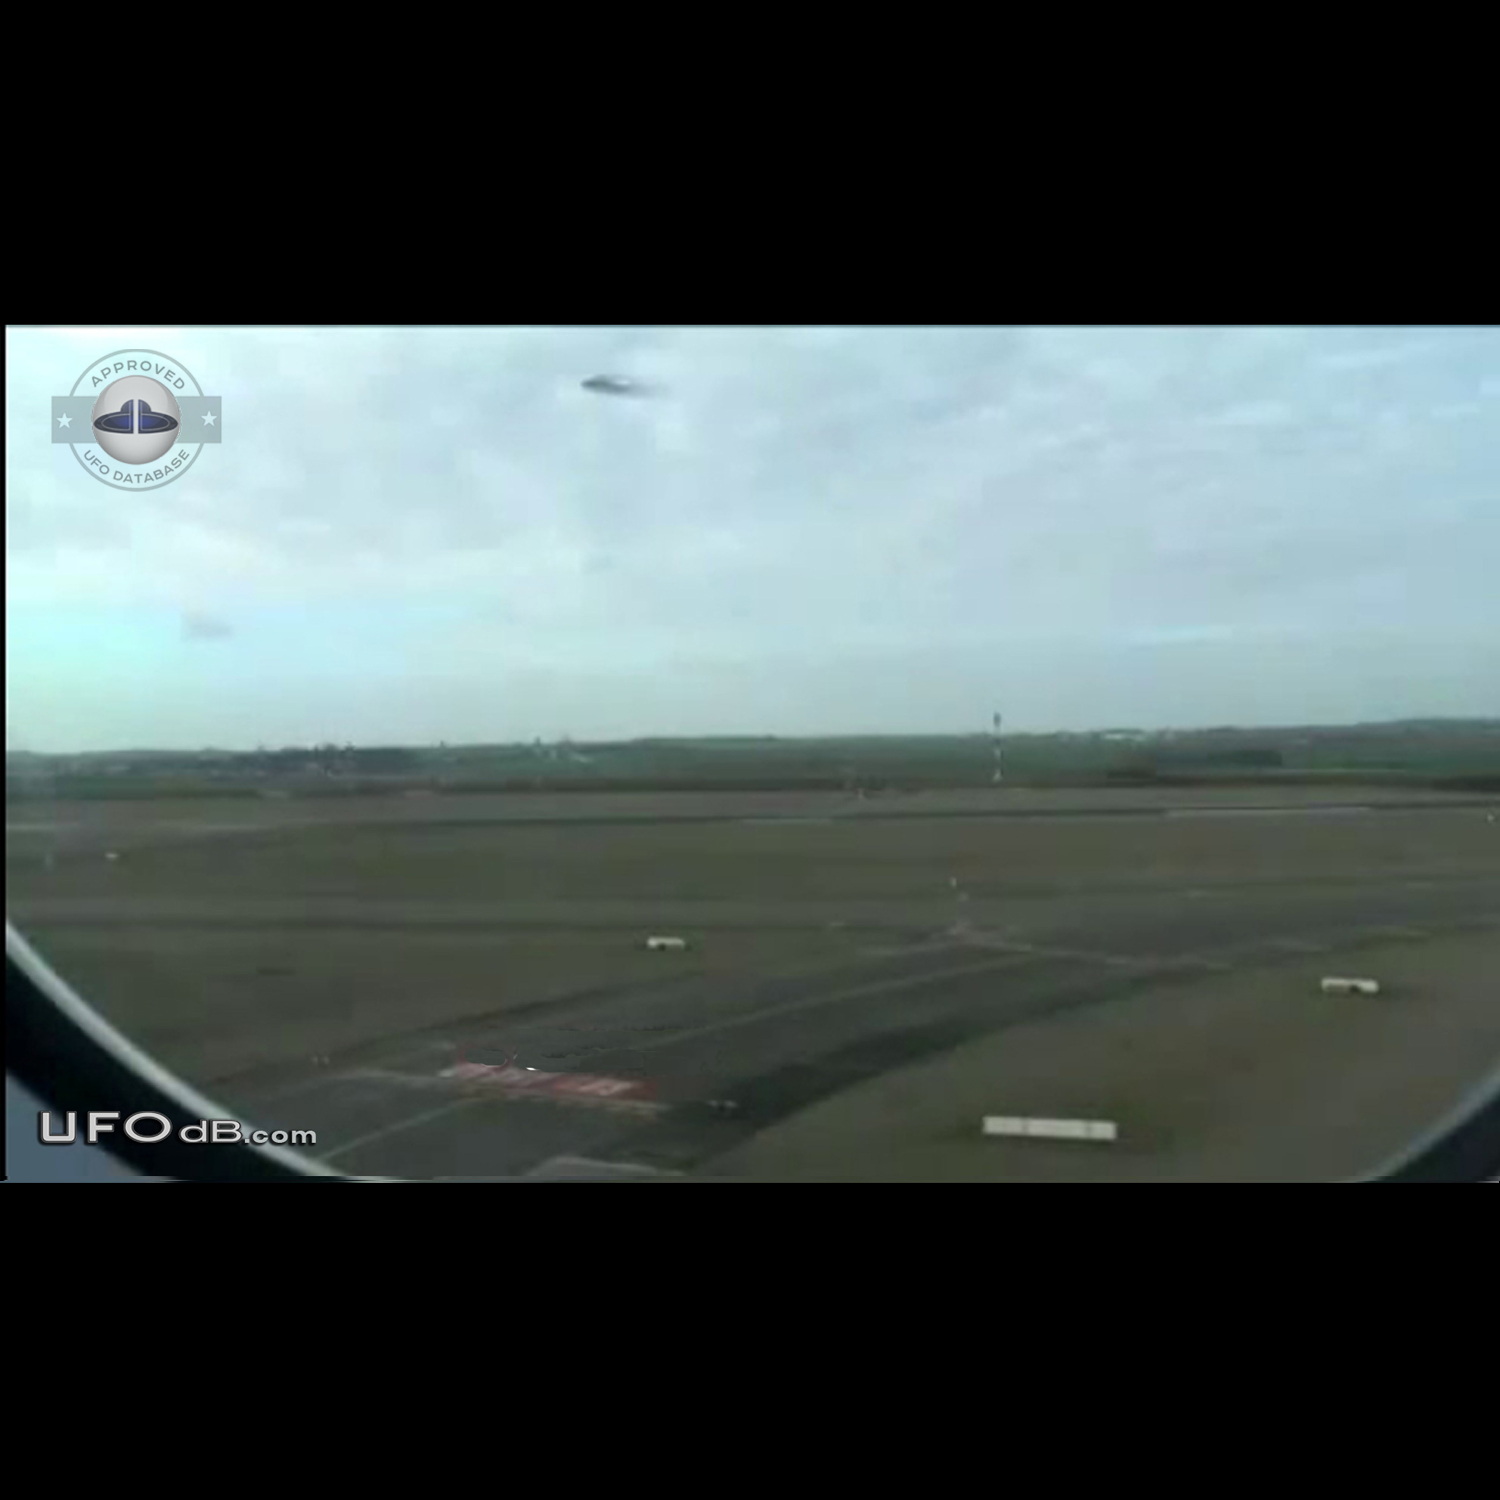 UFO picture from plane taking off Paris Charles de Gaulle airport 2013 UFO Picture #541-3